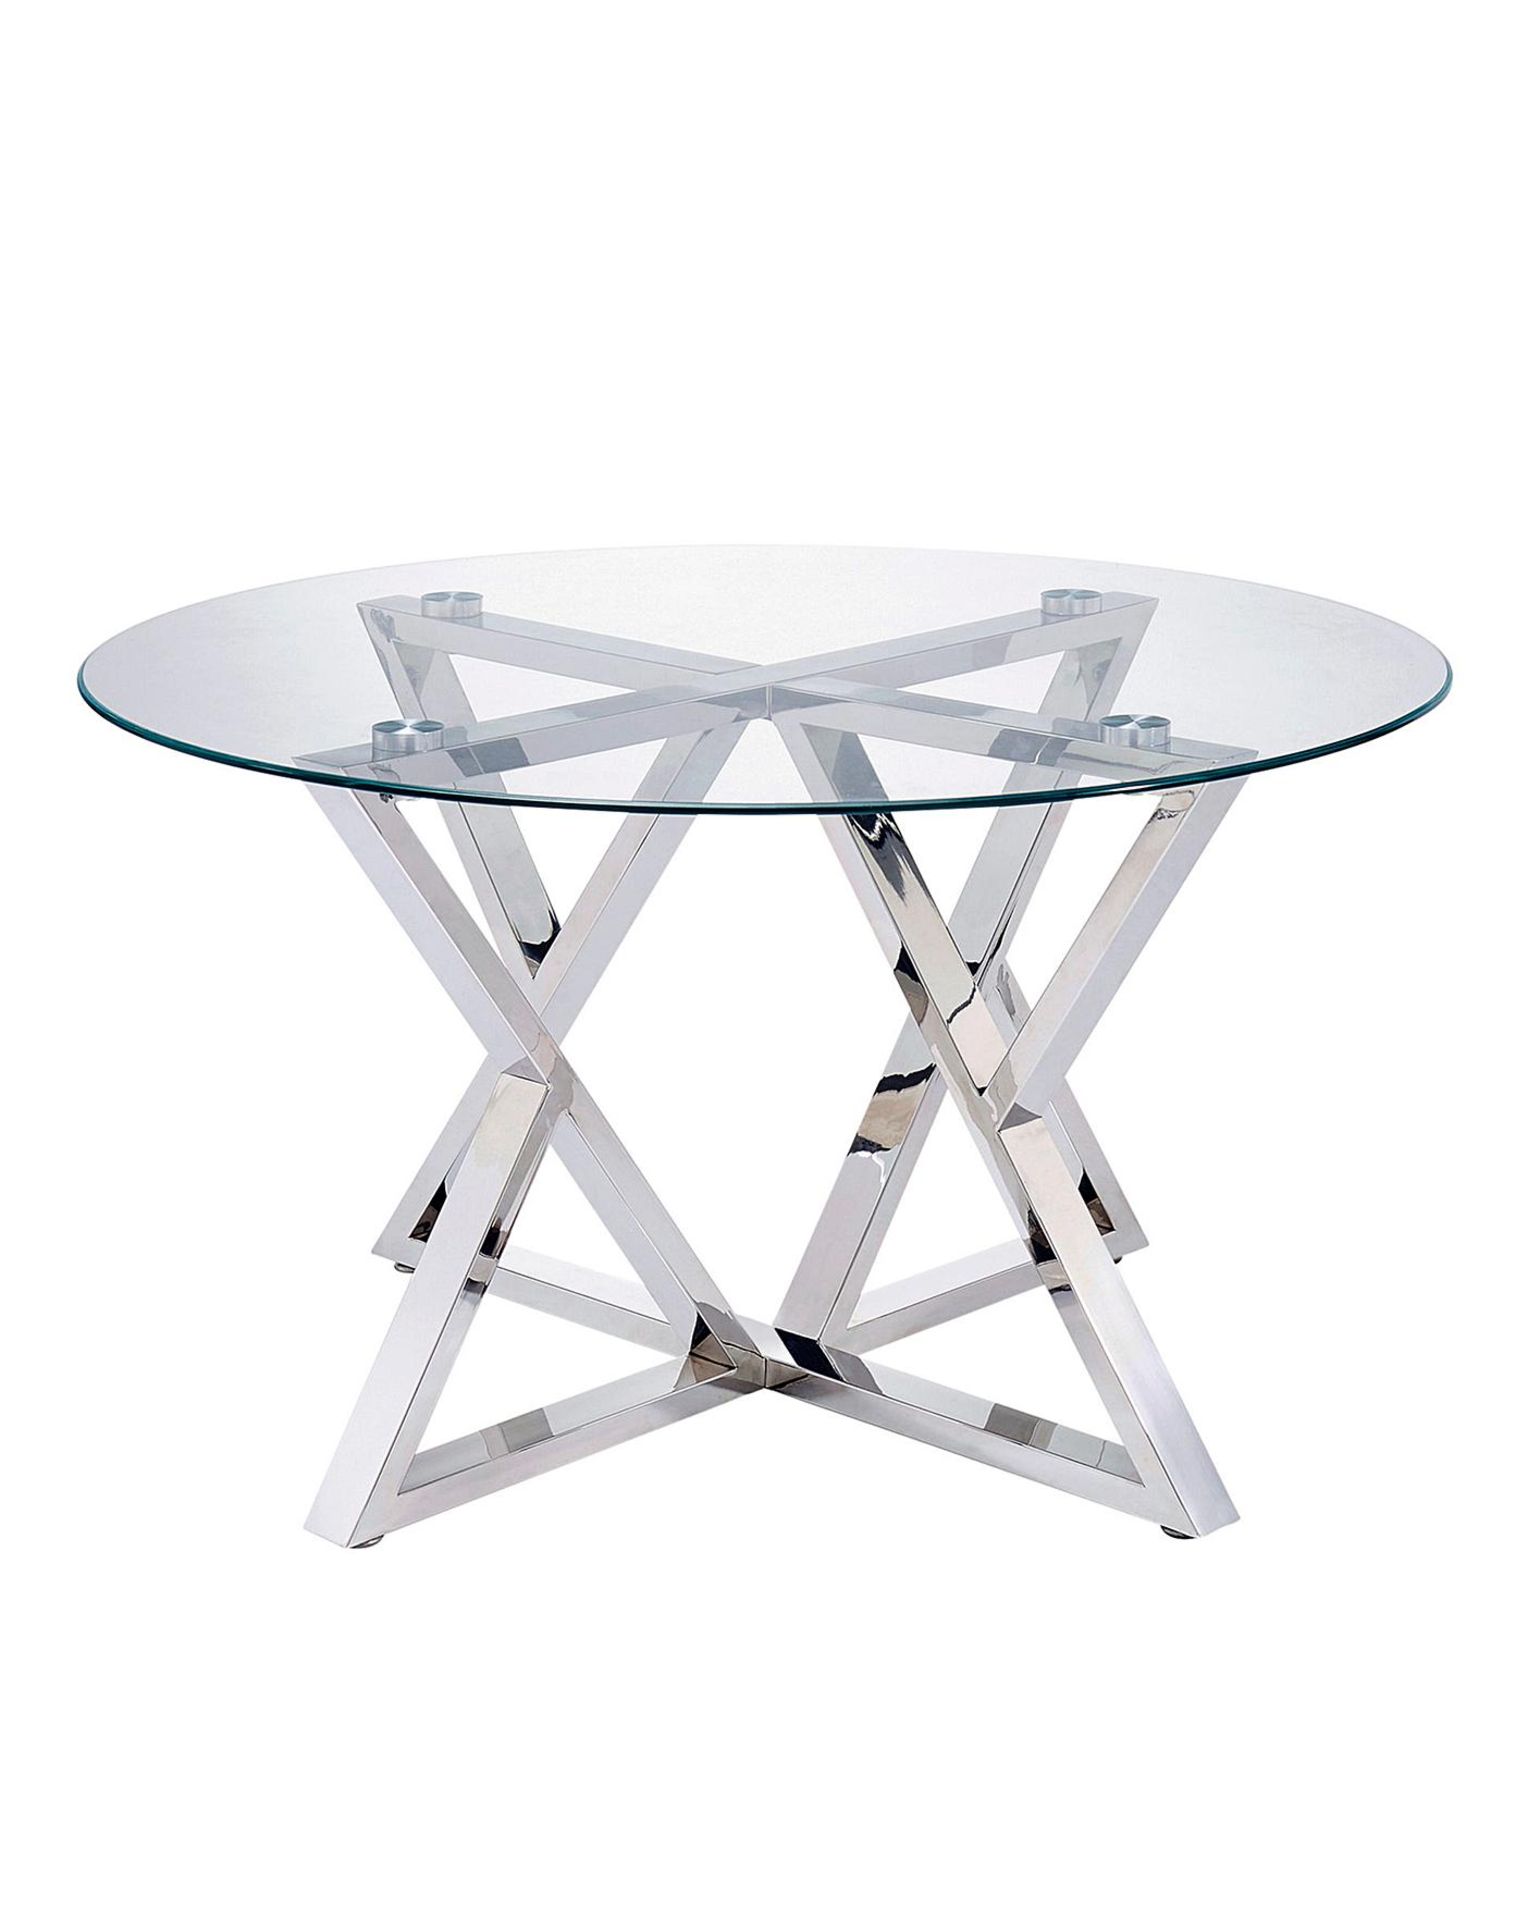 NEW & BOXED ESTELLE Coffee Table. RRP £199. Part of At Home Collection, the Estelle Coffee Table - Image 2 of 2